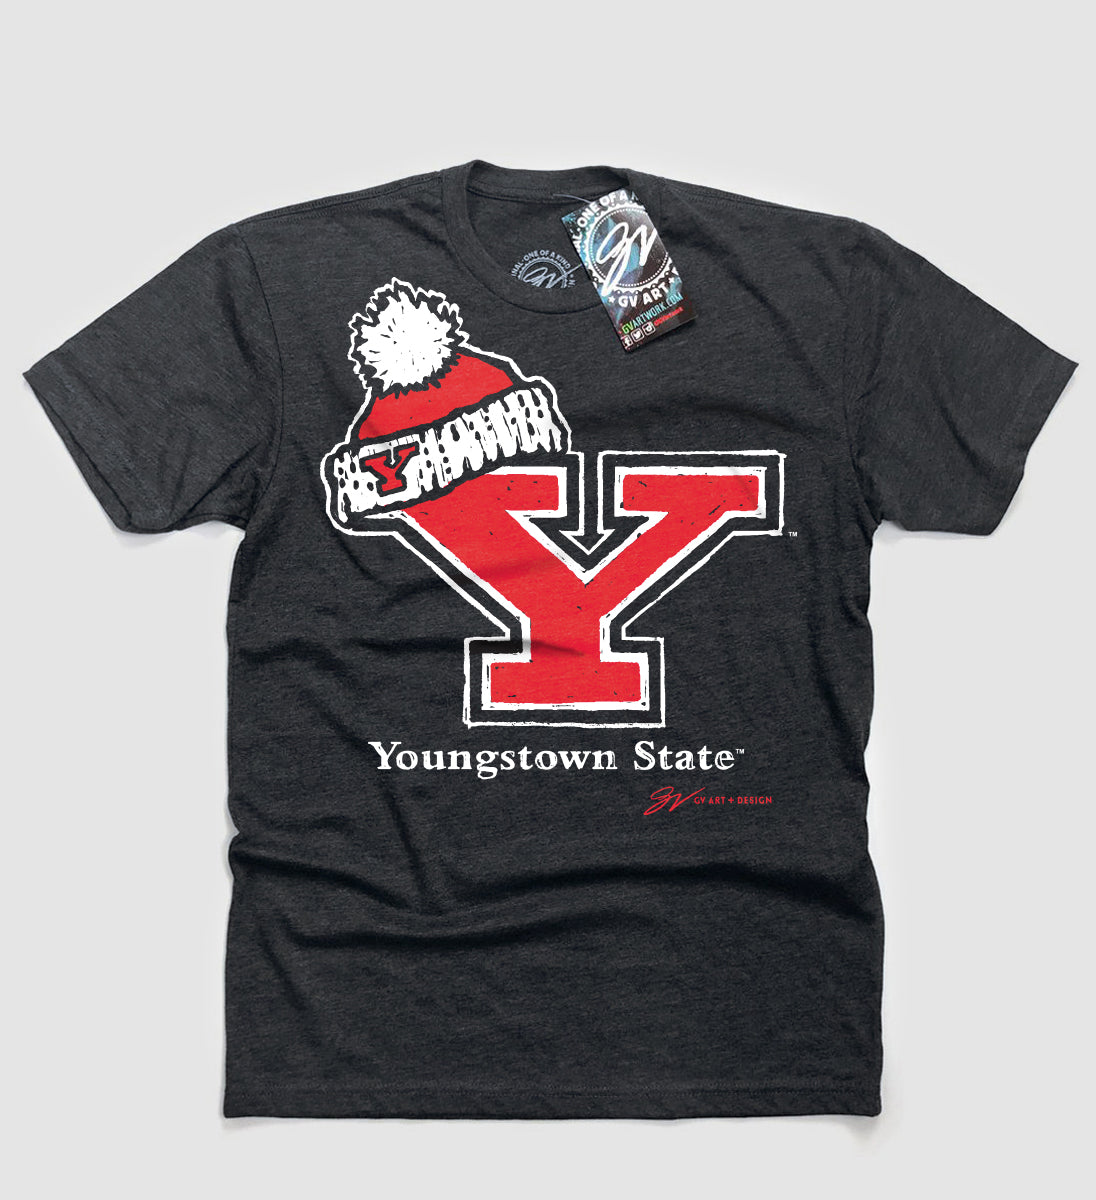 Youngstown State "Y" T shirt